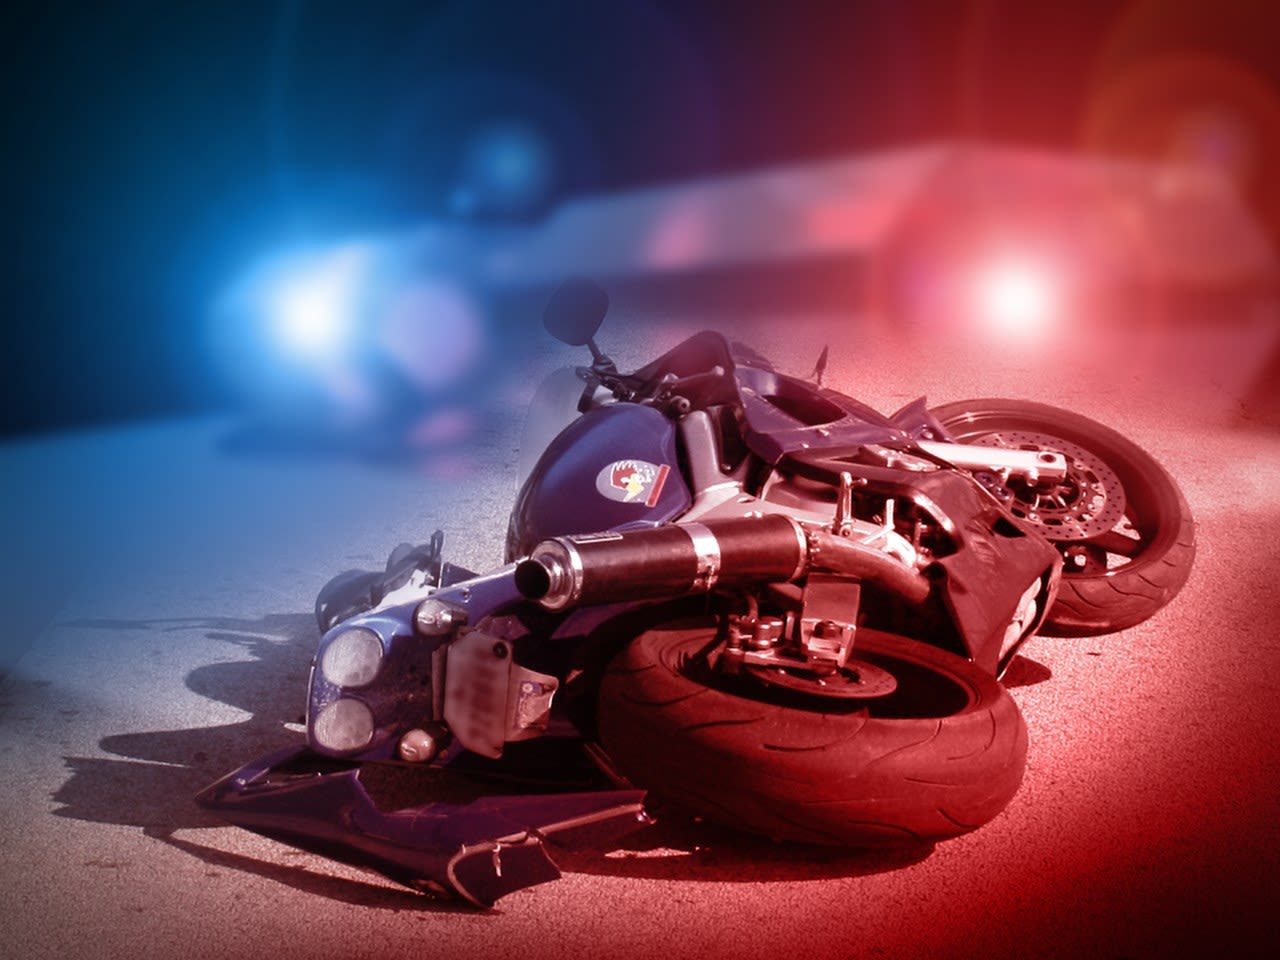 Motorcyclist killed after driver runs red light in Hillsborough County: FHP